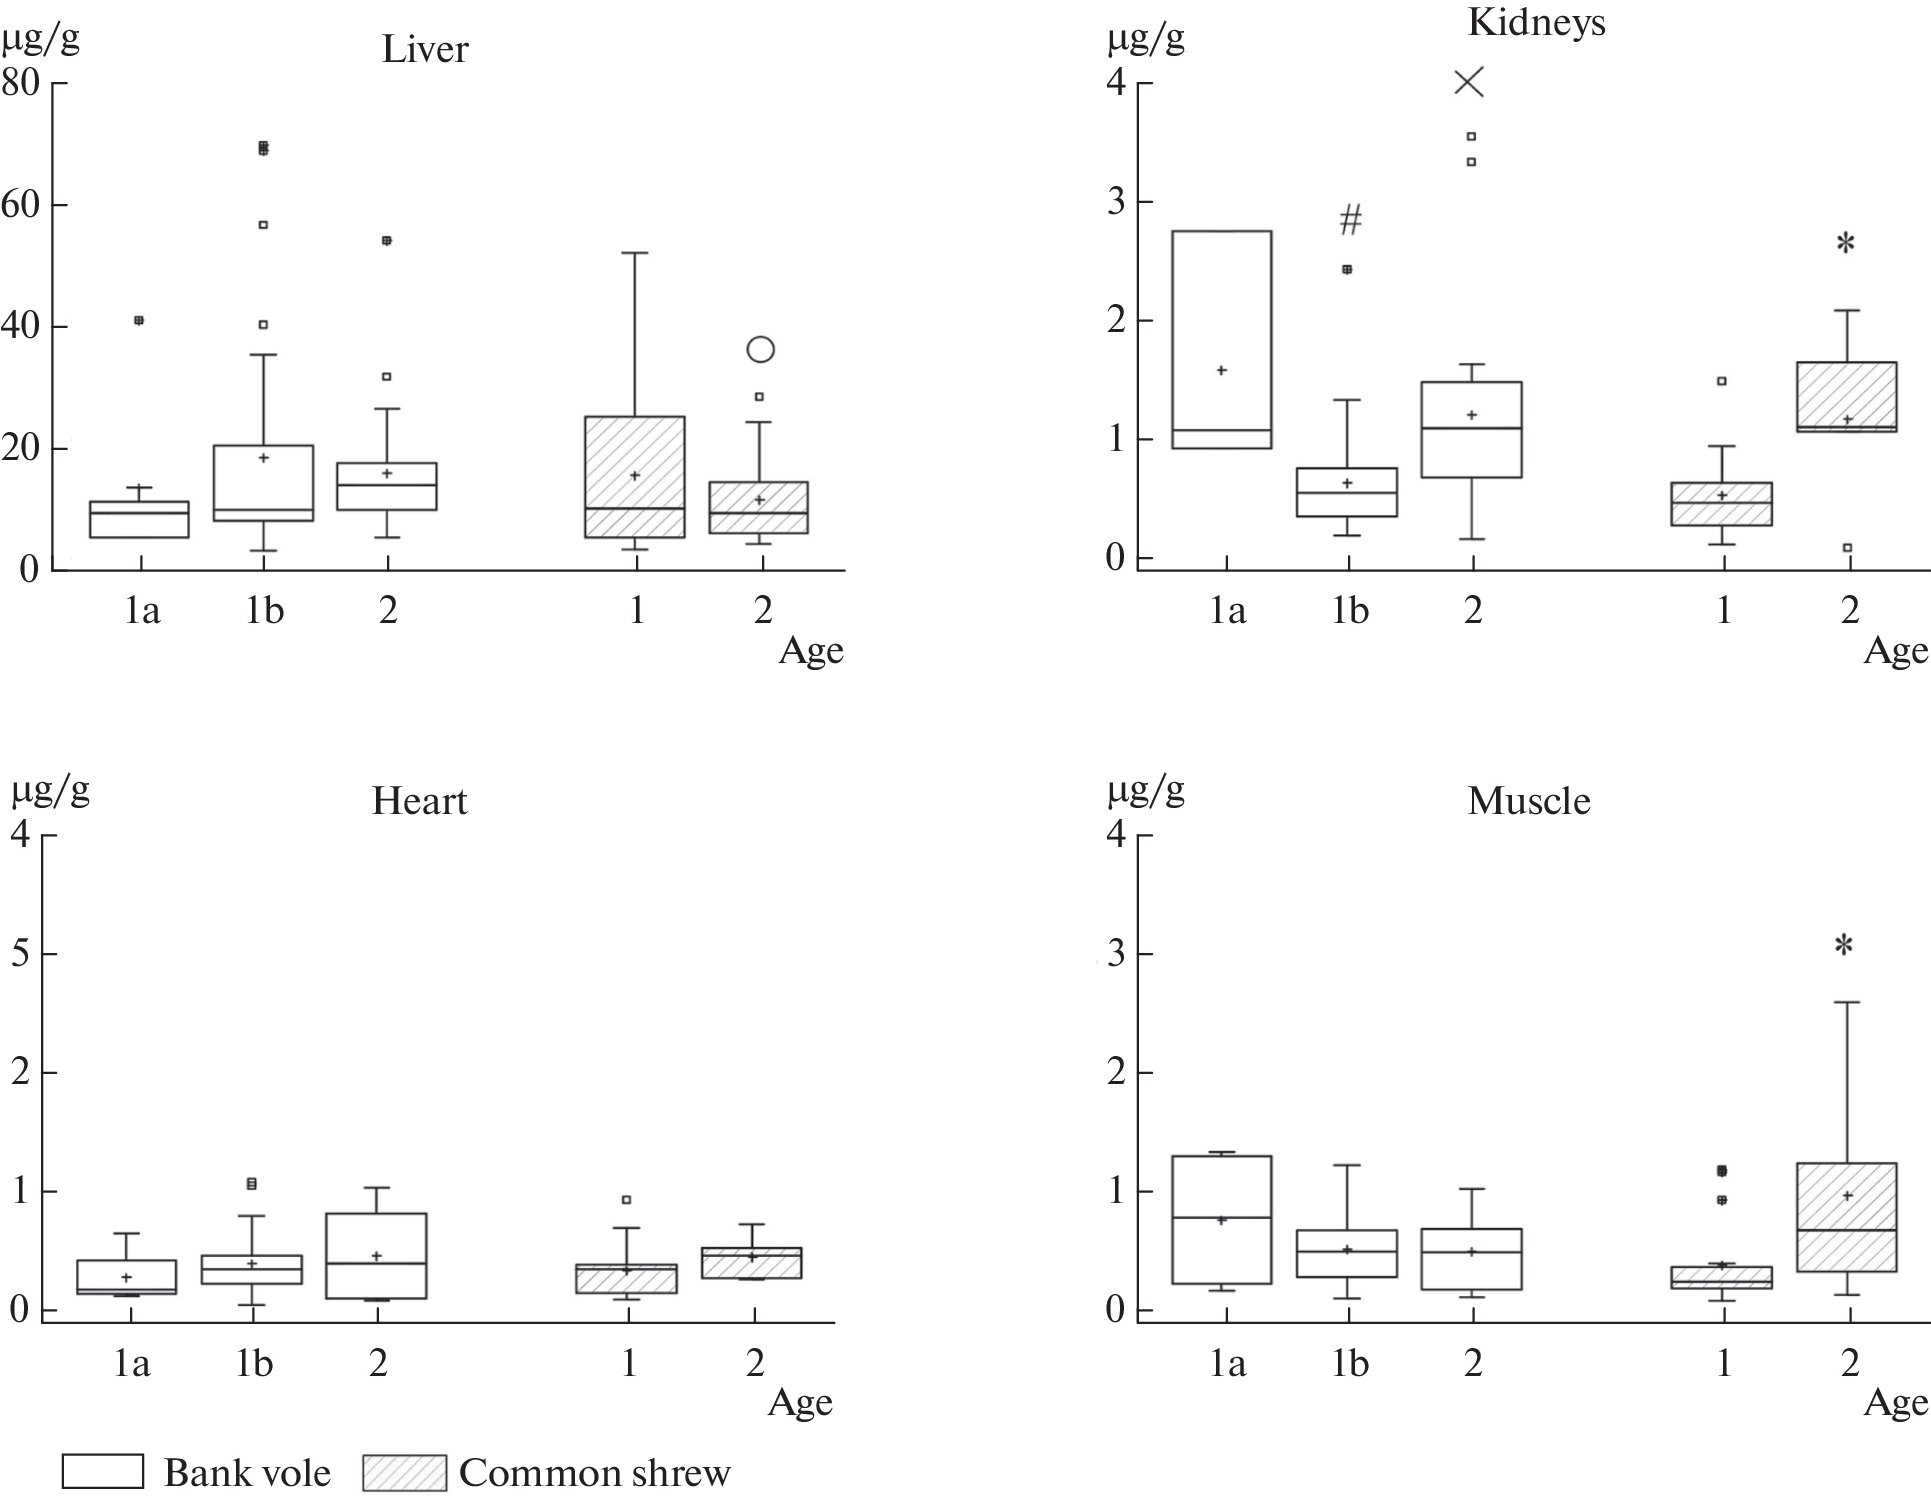 On the Concentration of Vitamins A and E in the Tissues of the Bank Vole (Myodes (Clethrionomys) glareolus) and Common Shrew (Sorex araneus) Inhabiting Karelia